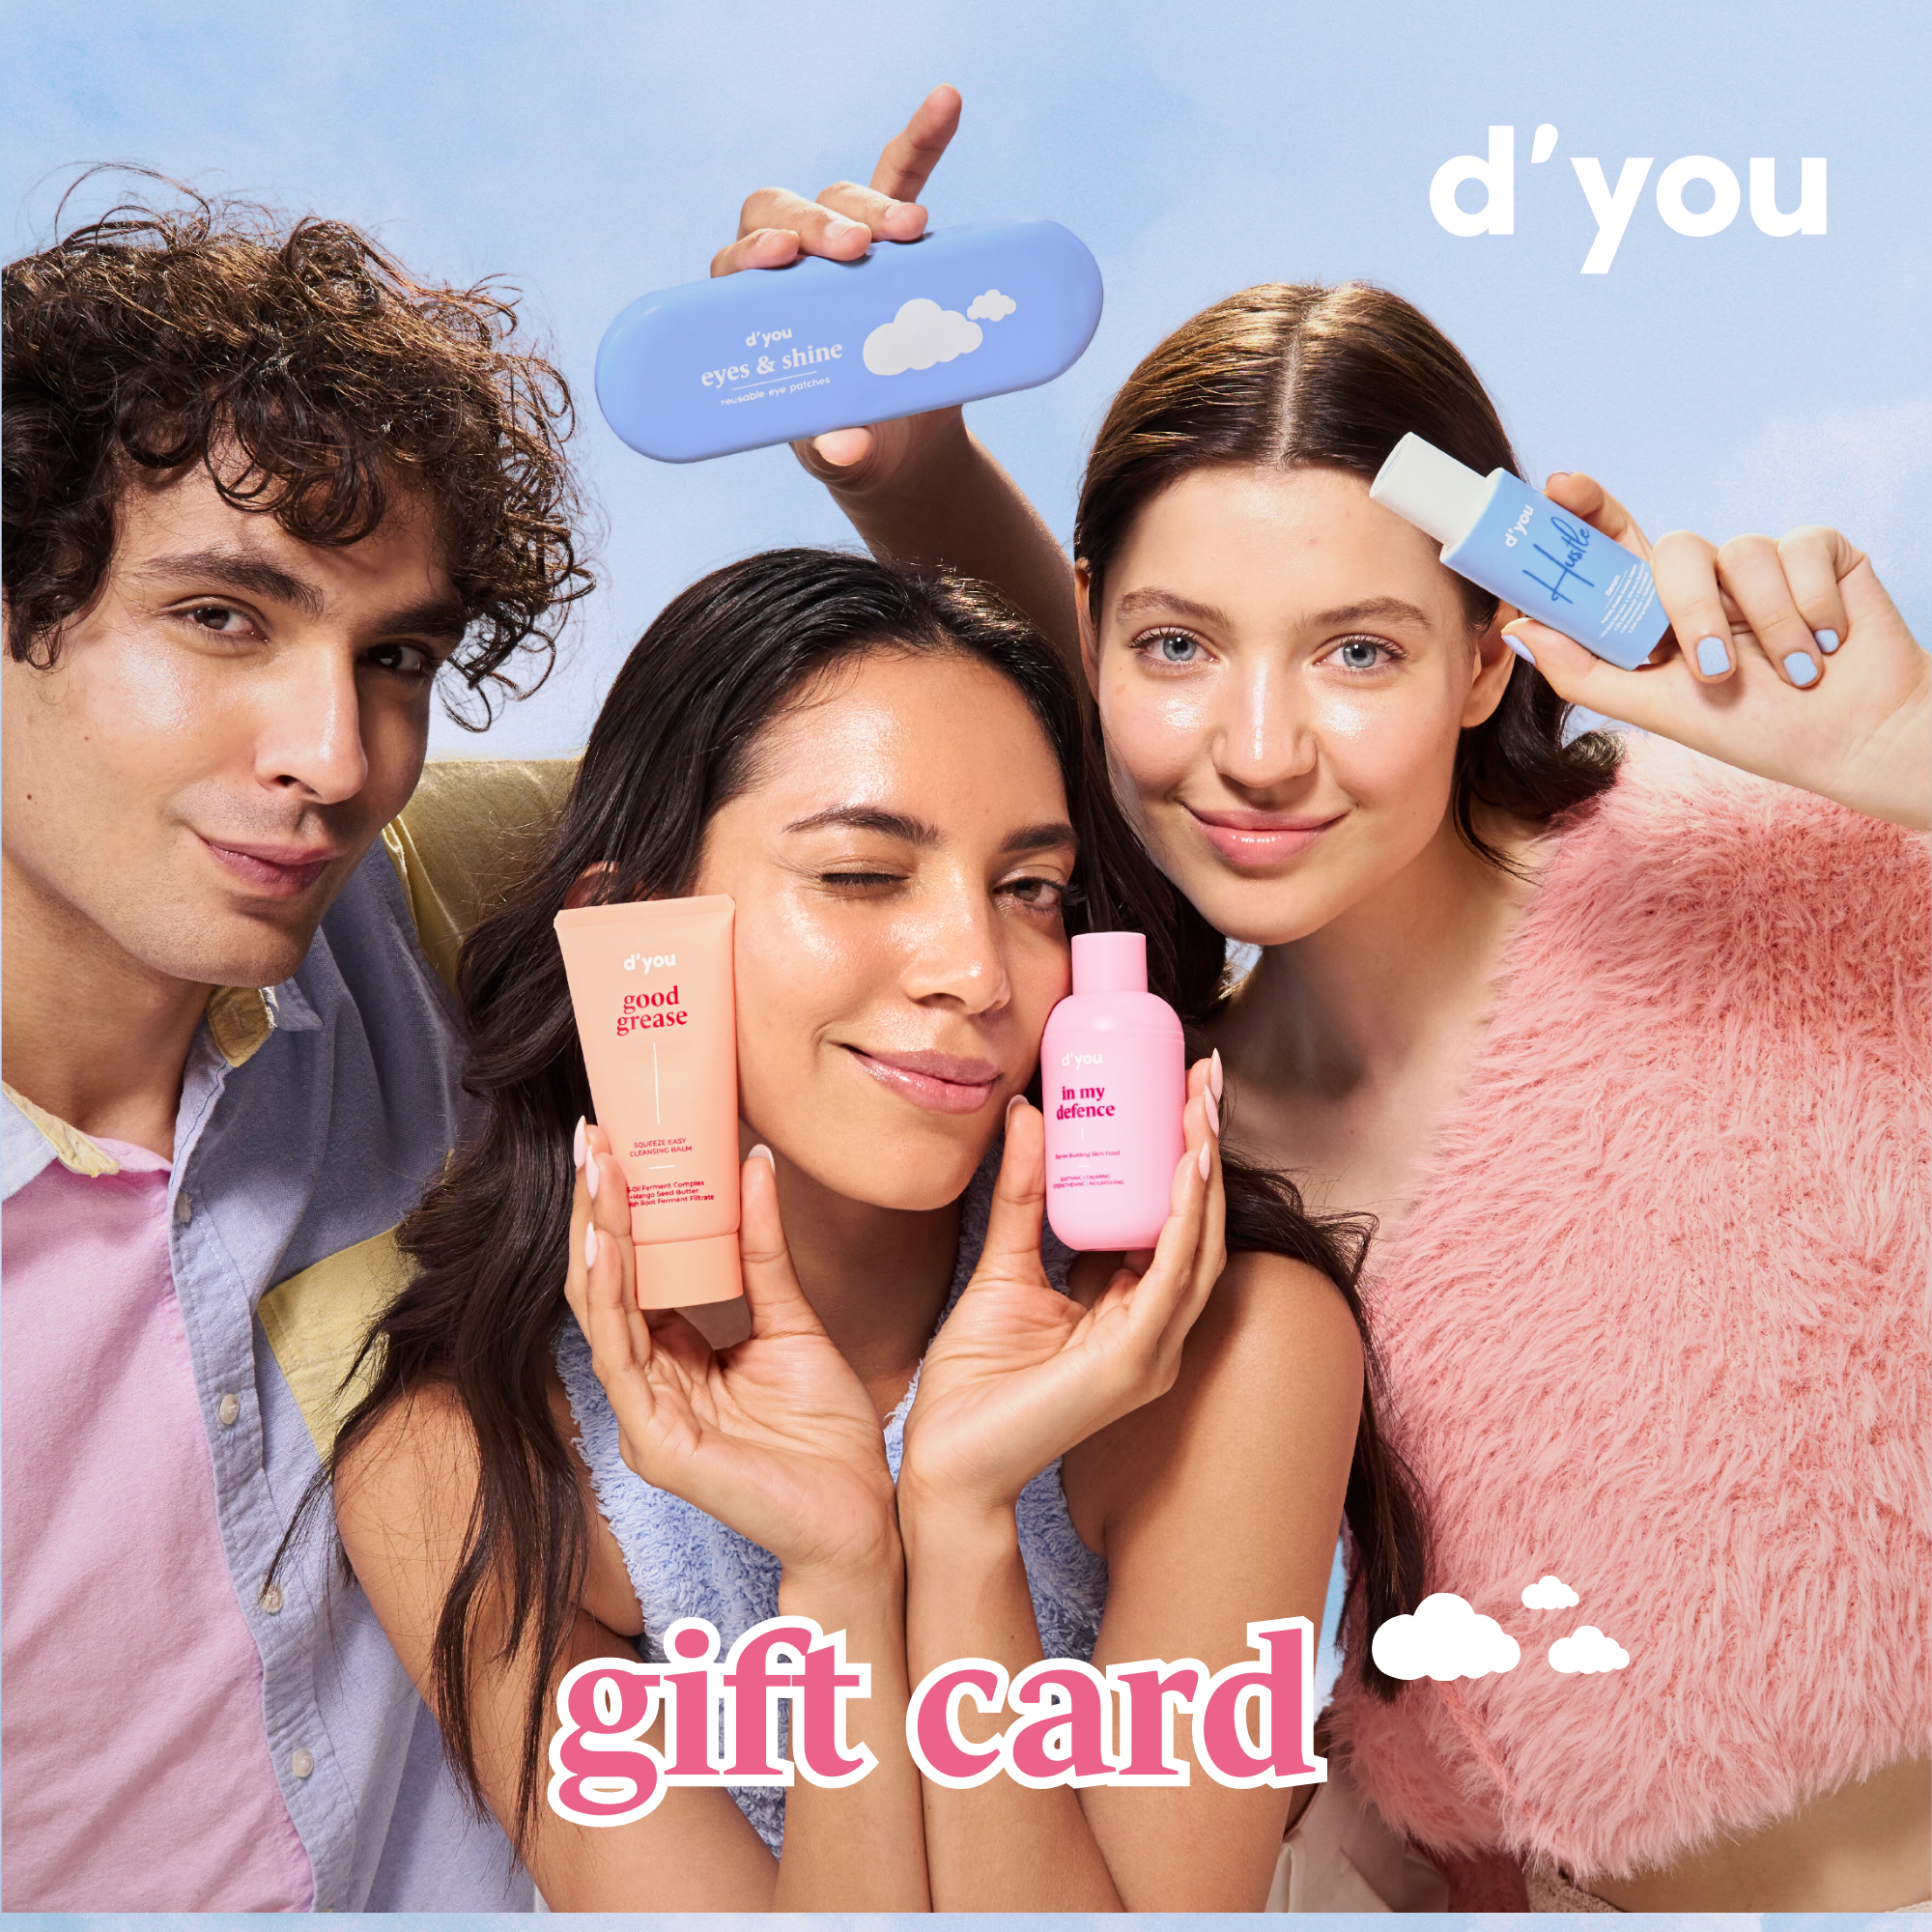 d'you gift card-3